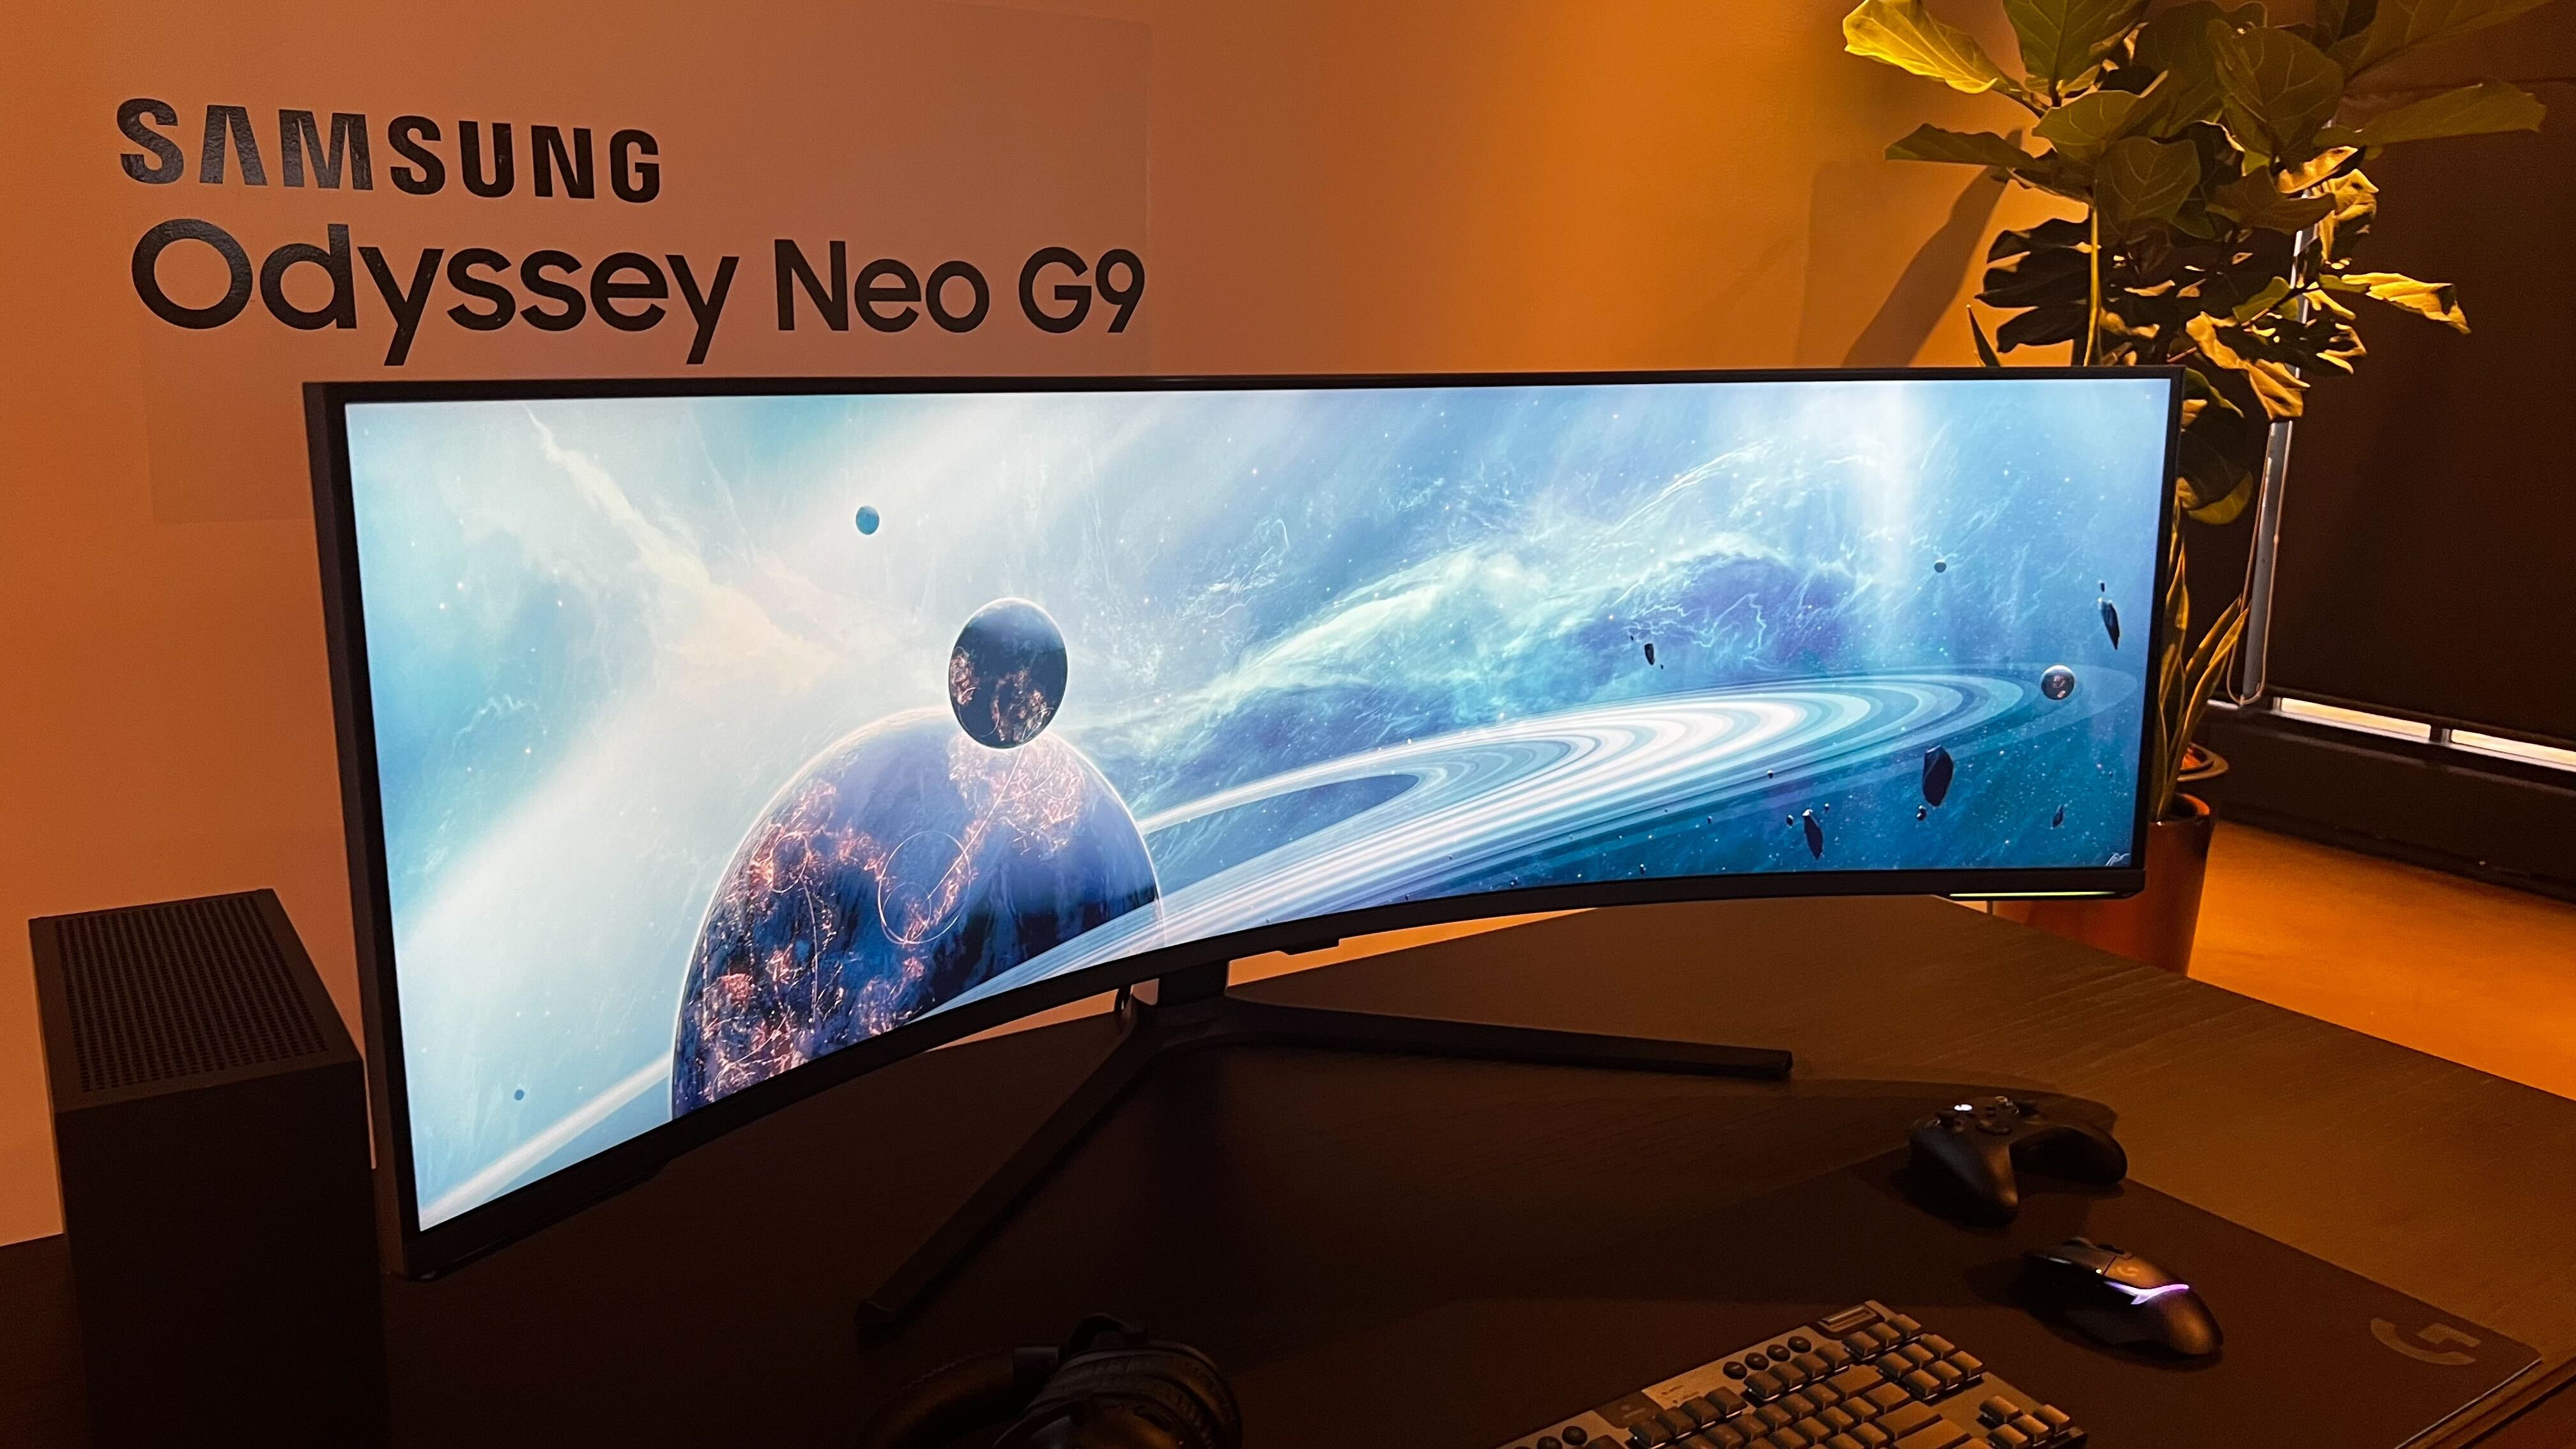  Samsung's new gigantic 57-inch gaming monitor is basically two 4K monitors side by side and it's glorious  